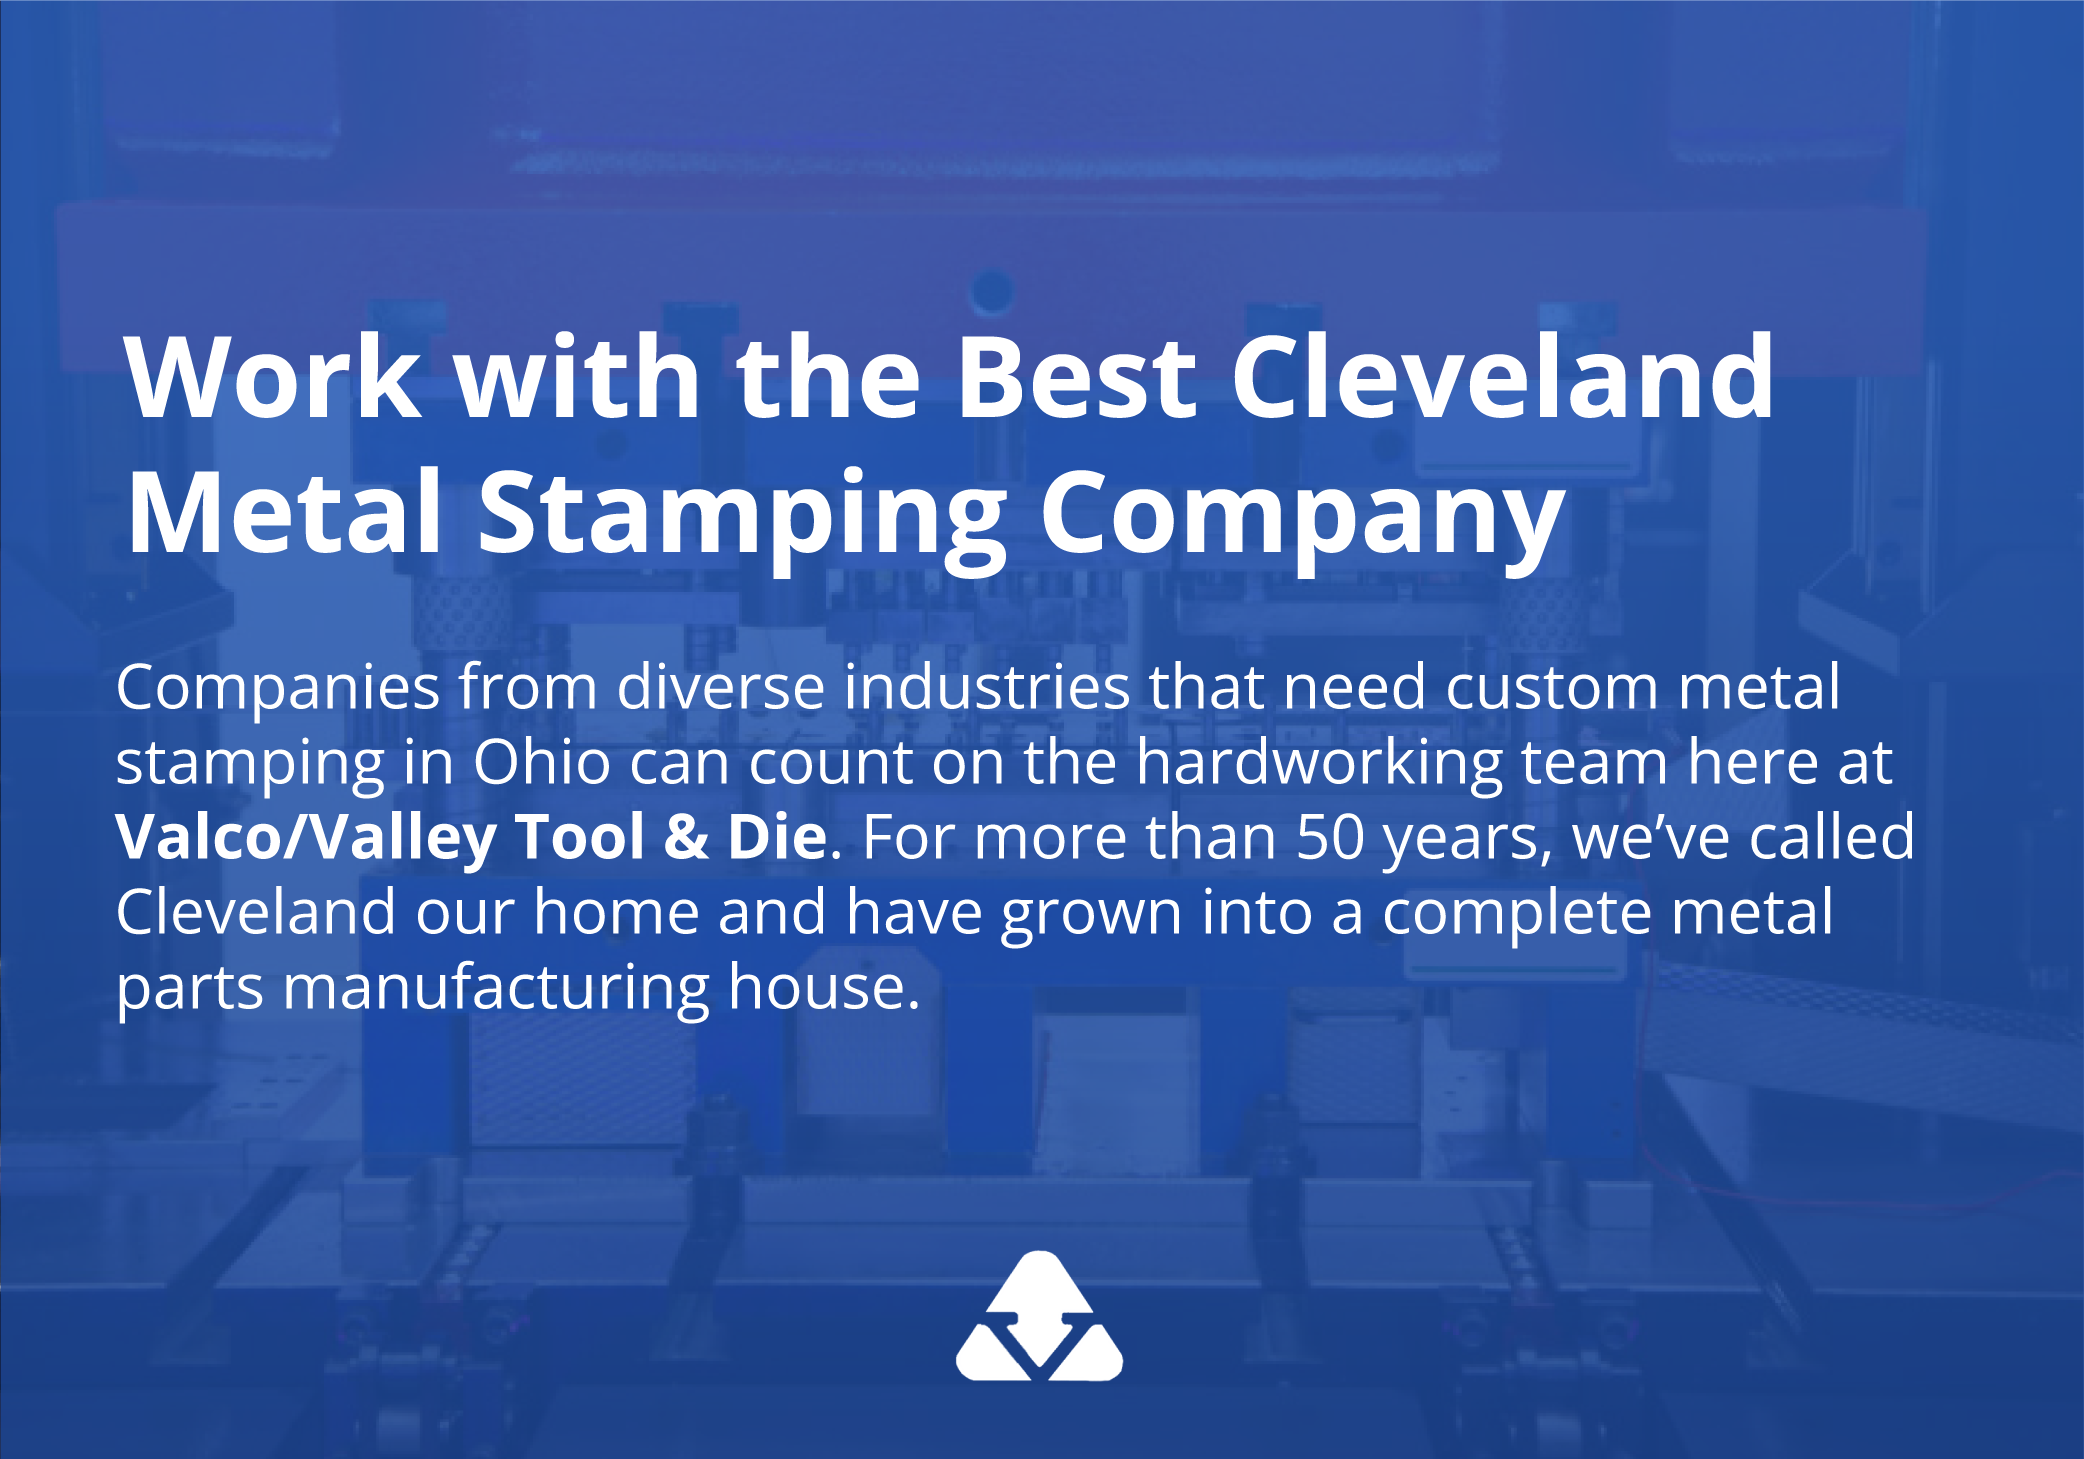 Work with the Best Cleveland Metal Stamping Company